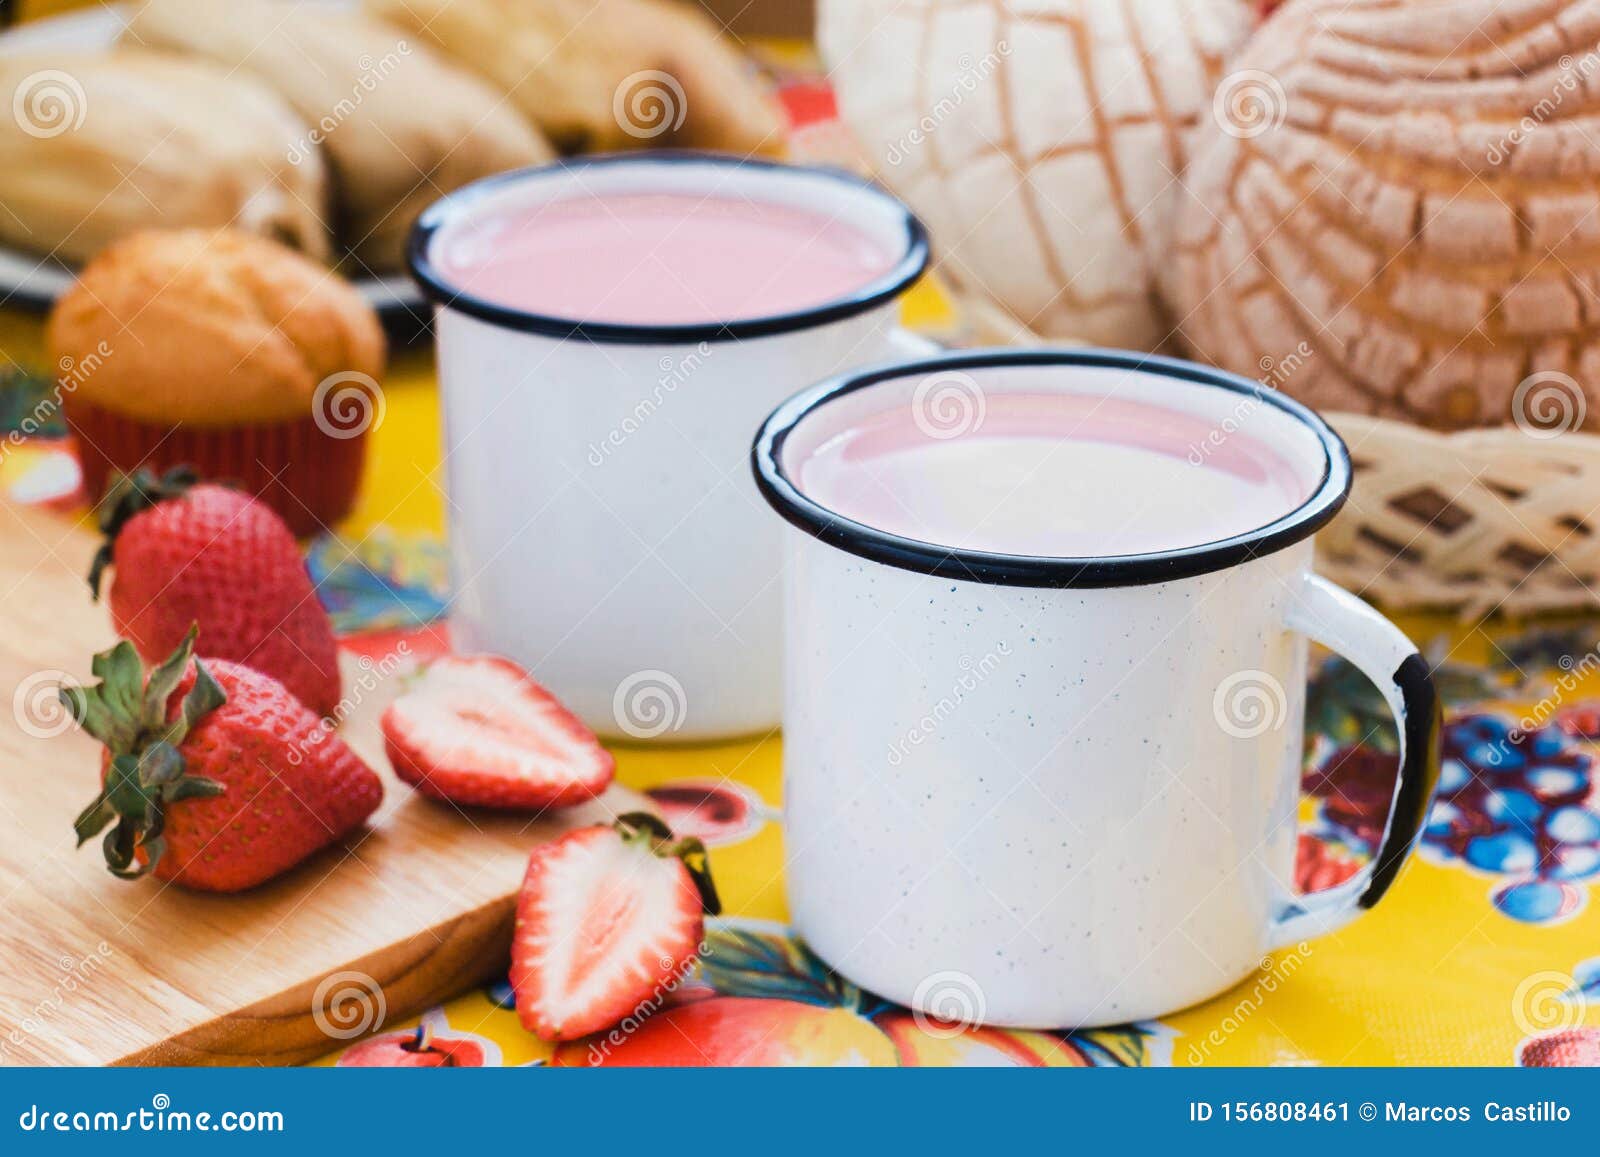 atole de fresa, mexican traditional beverage and bread, made with cinnamon and strawberries in mexico